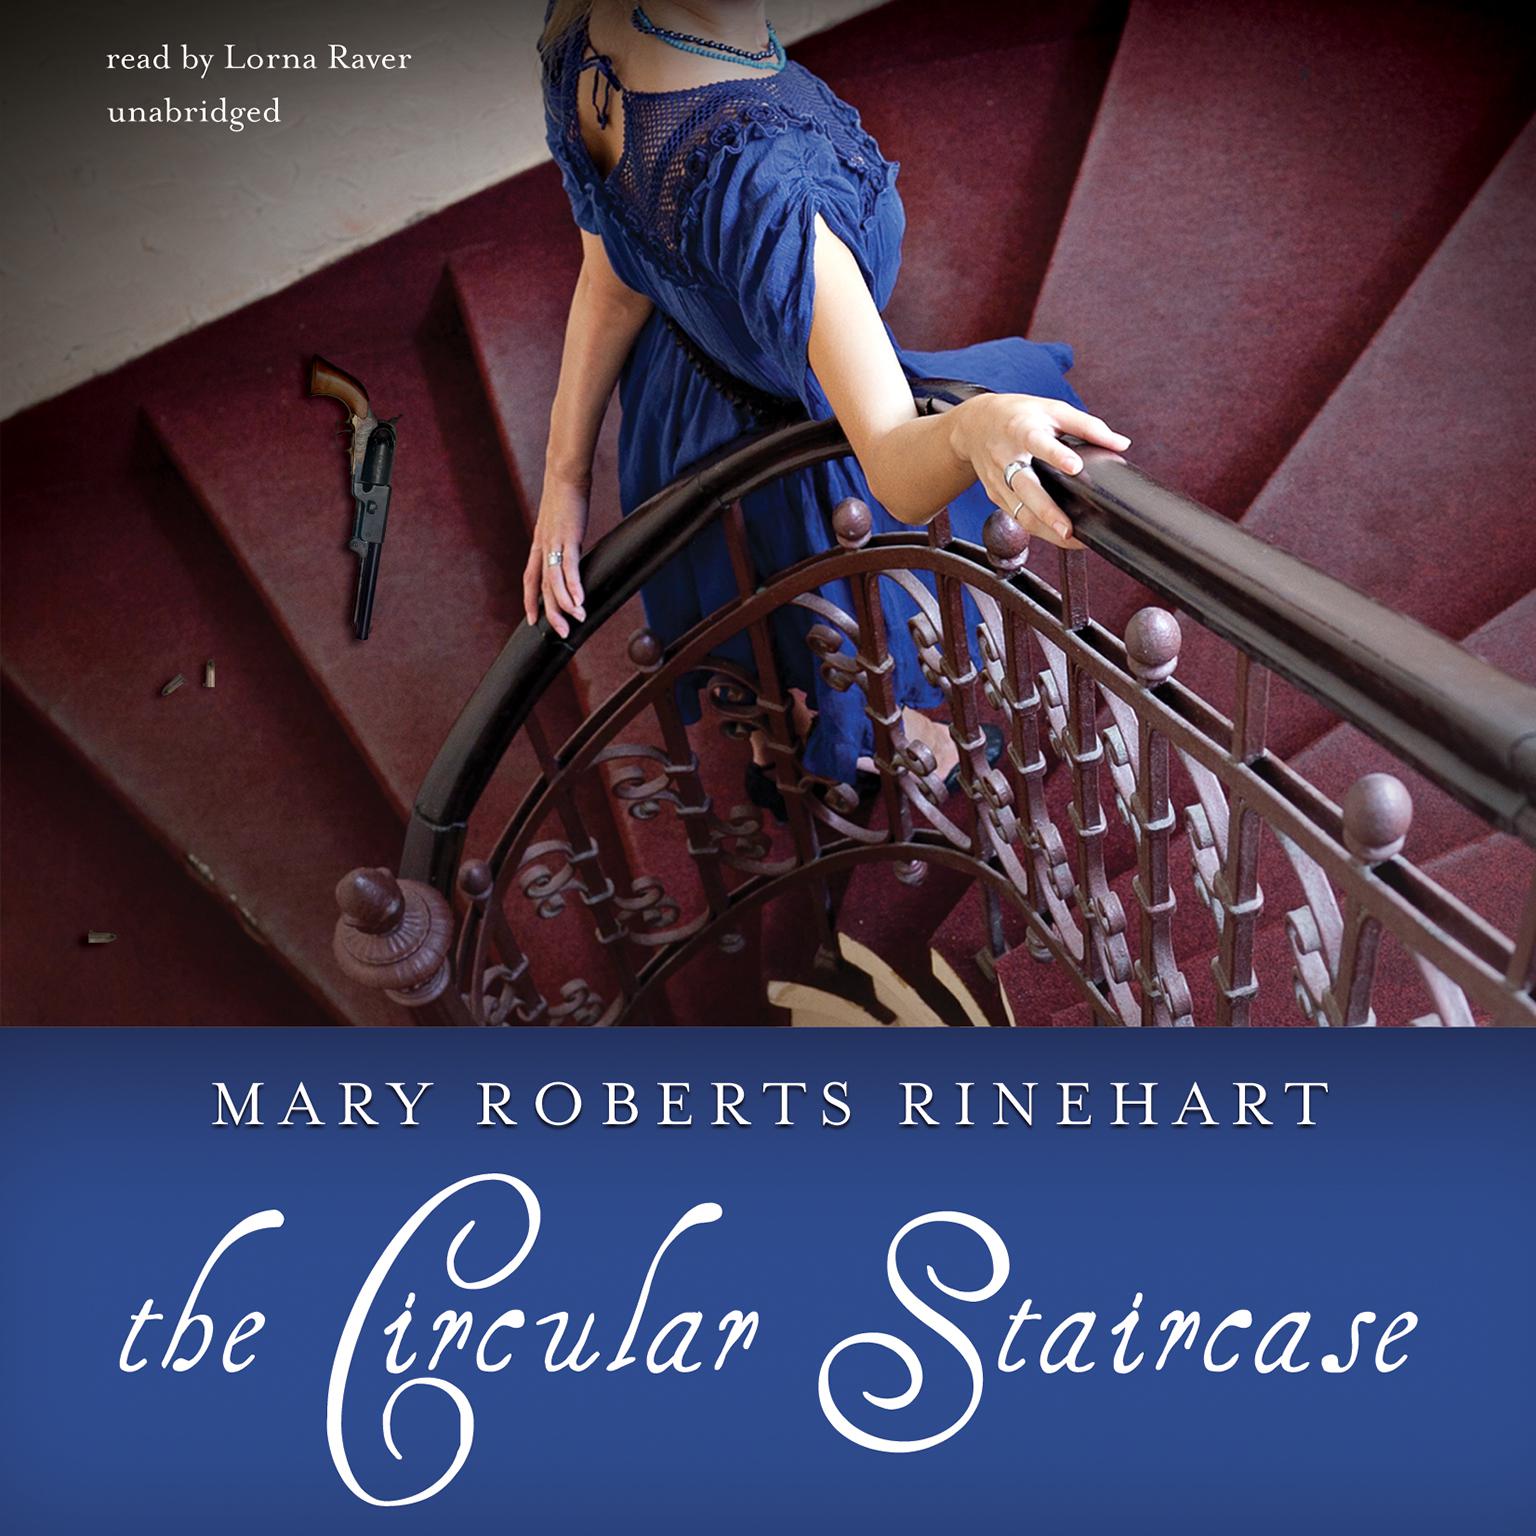 The Circular Staircase Audiobook, by Mary Roberts Rinehart